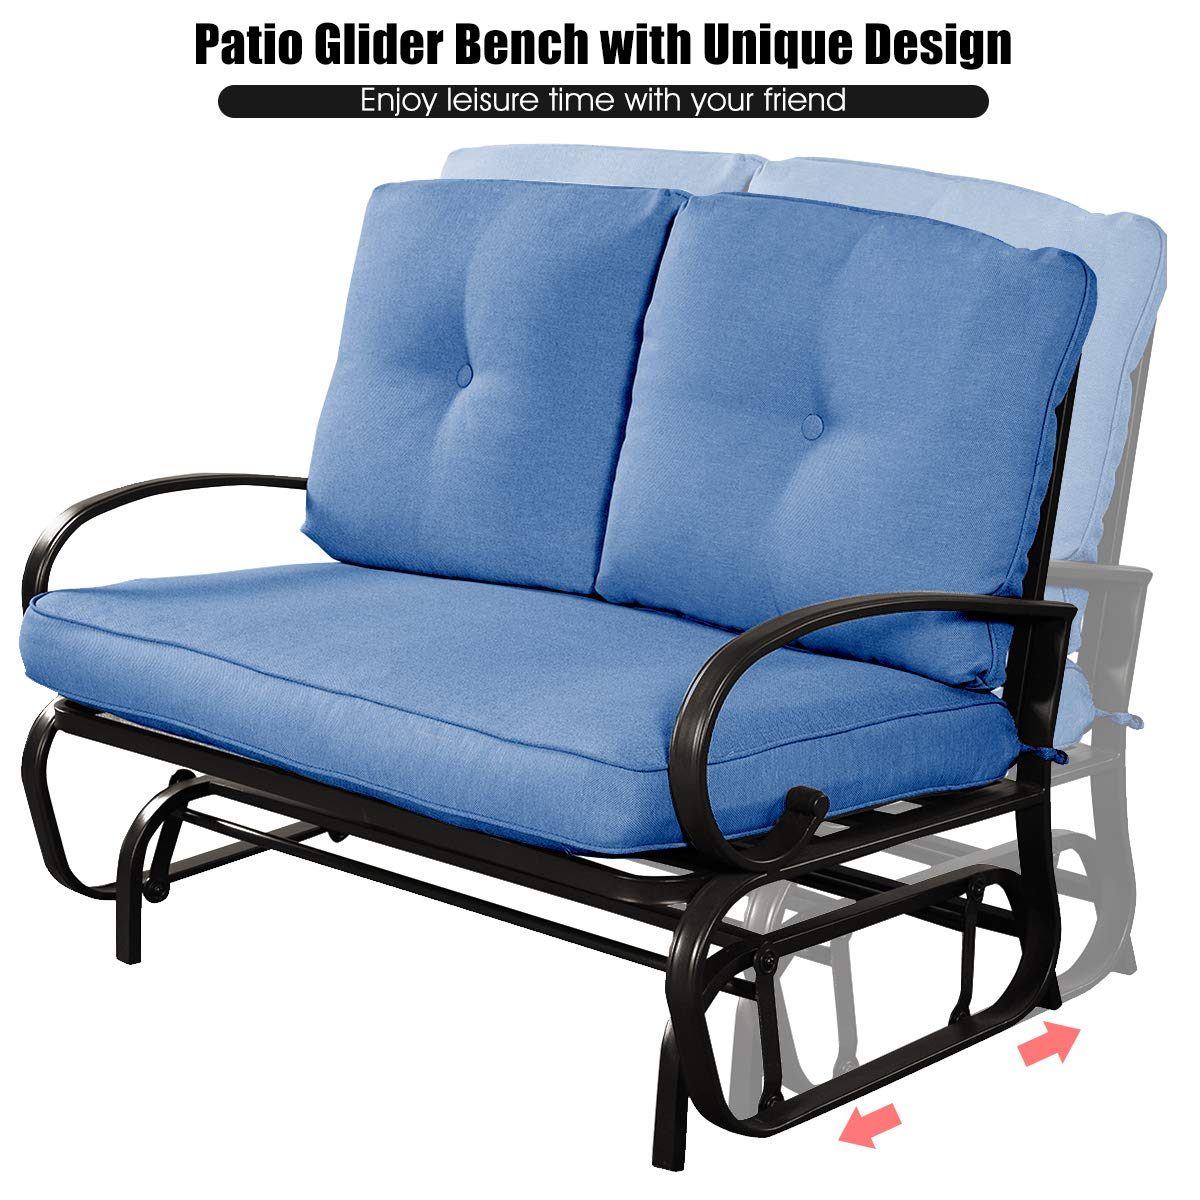 Giantex Loveseat Outdoor Patio Rocking Glider Cushioned 2 Seats